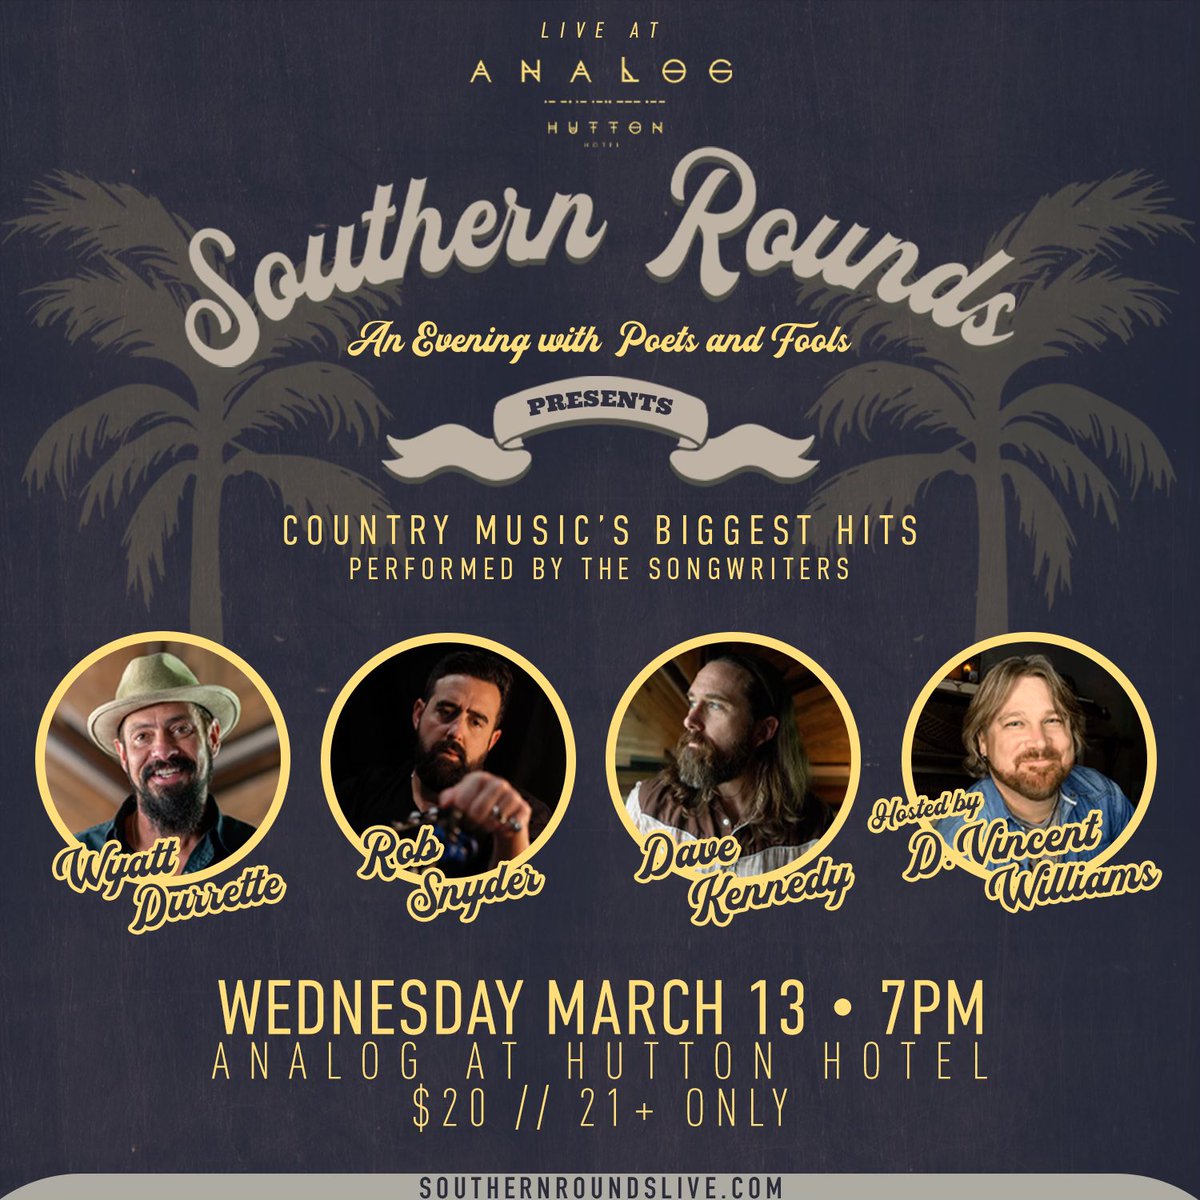 🚨On March 13th, we have an incredible line up of @WyattDurrett , @BigRobSnyder, and @DaveKennedyJr, who have written songs for artists such as #LukeCombs, #ZacBrownBand, #davissonbrothers, and many more! Hosted by @DVincentMusic. Tickets are NOW AVAILABLE at the link in bio!